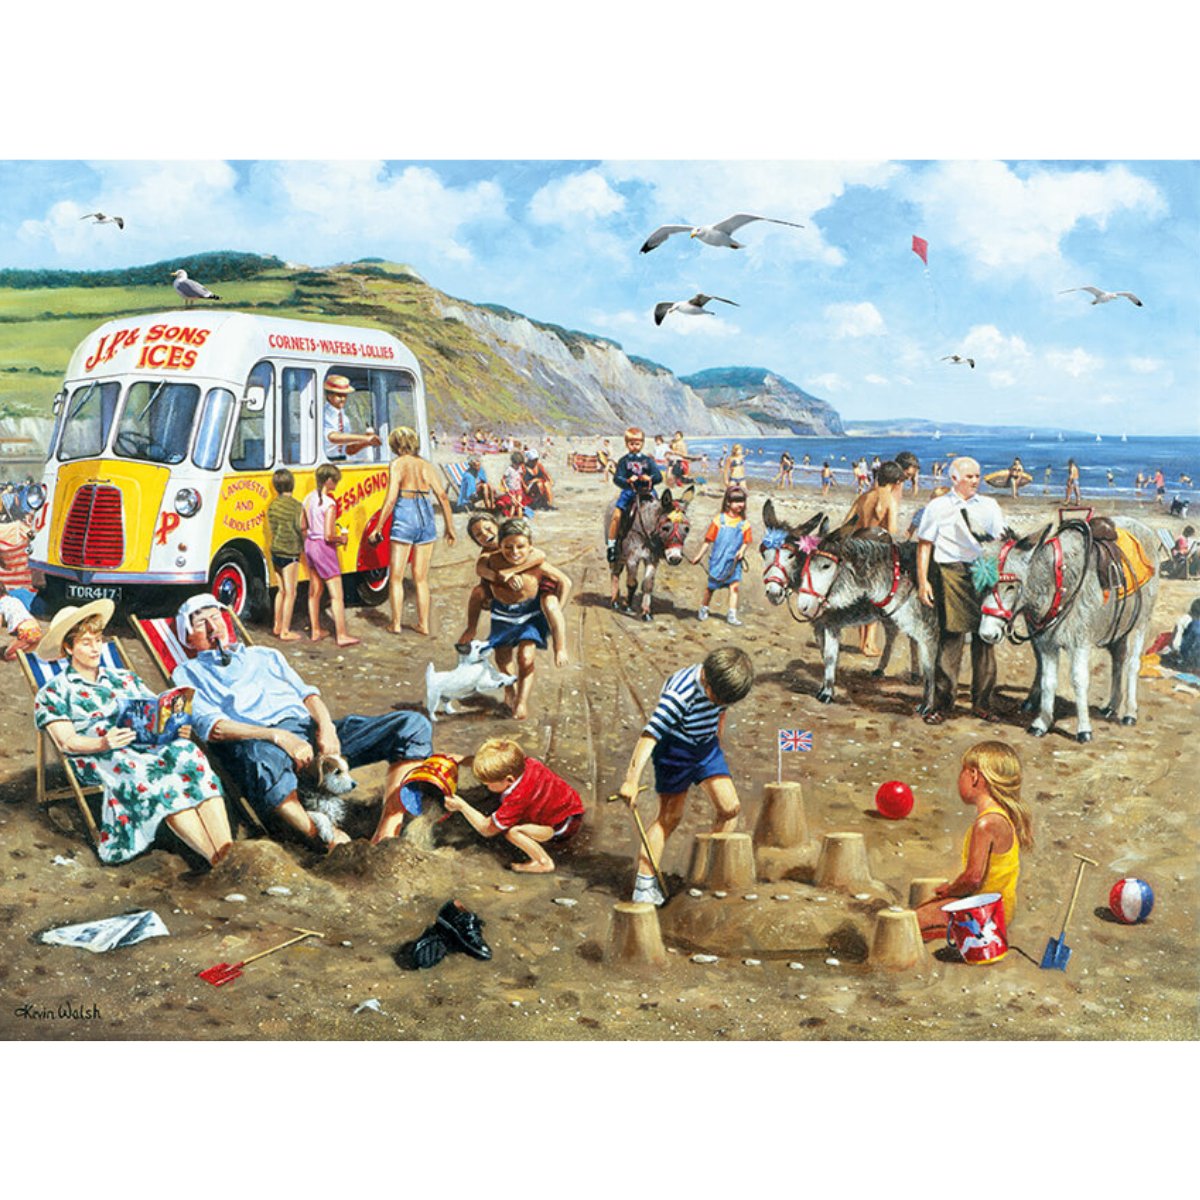 Kevin Walsh Nostalgia Bucket & Spade Jigsaw Puzzle (1000 Pieces)